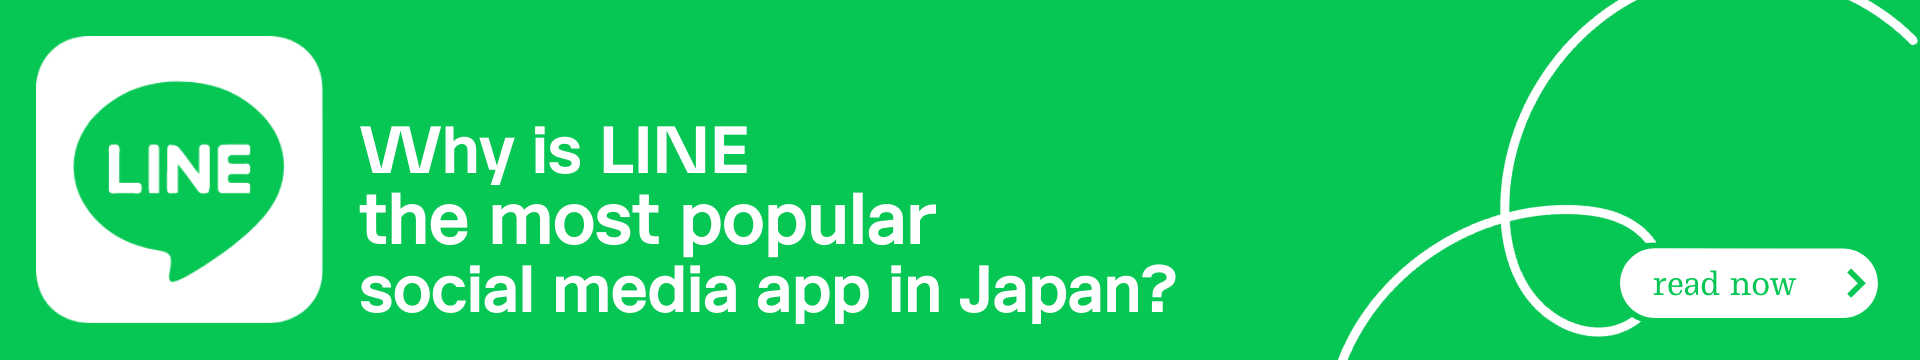 Why is LINE the most popular social media app in Japan